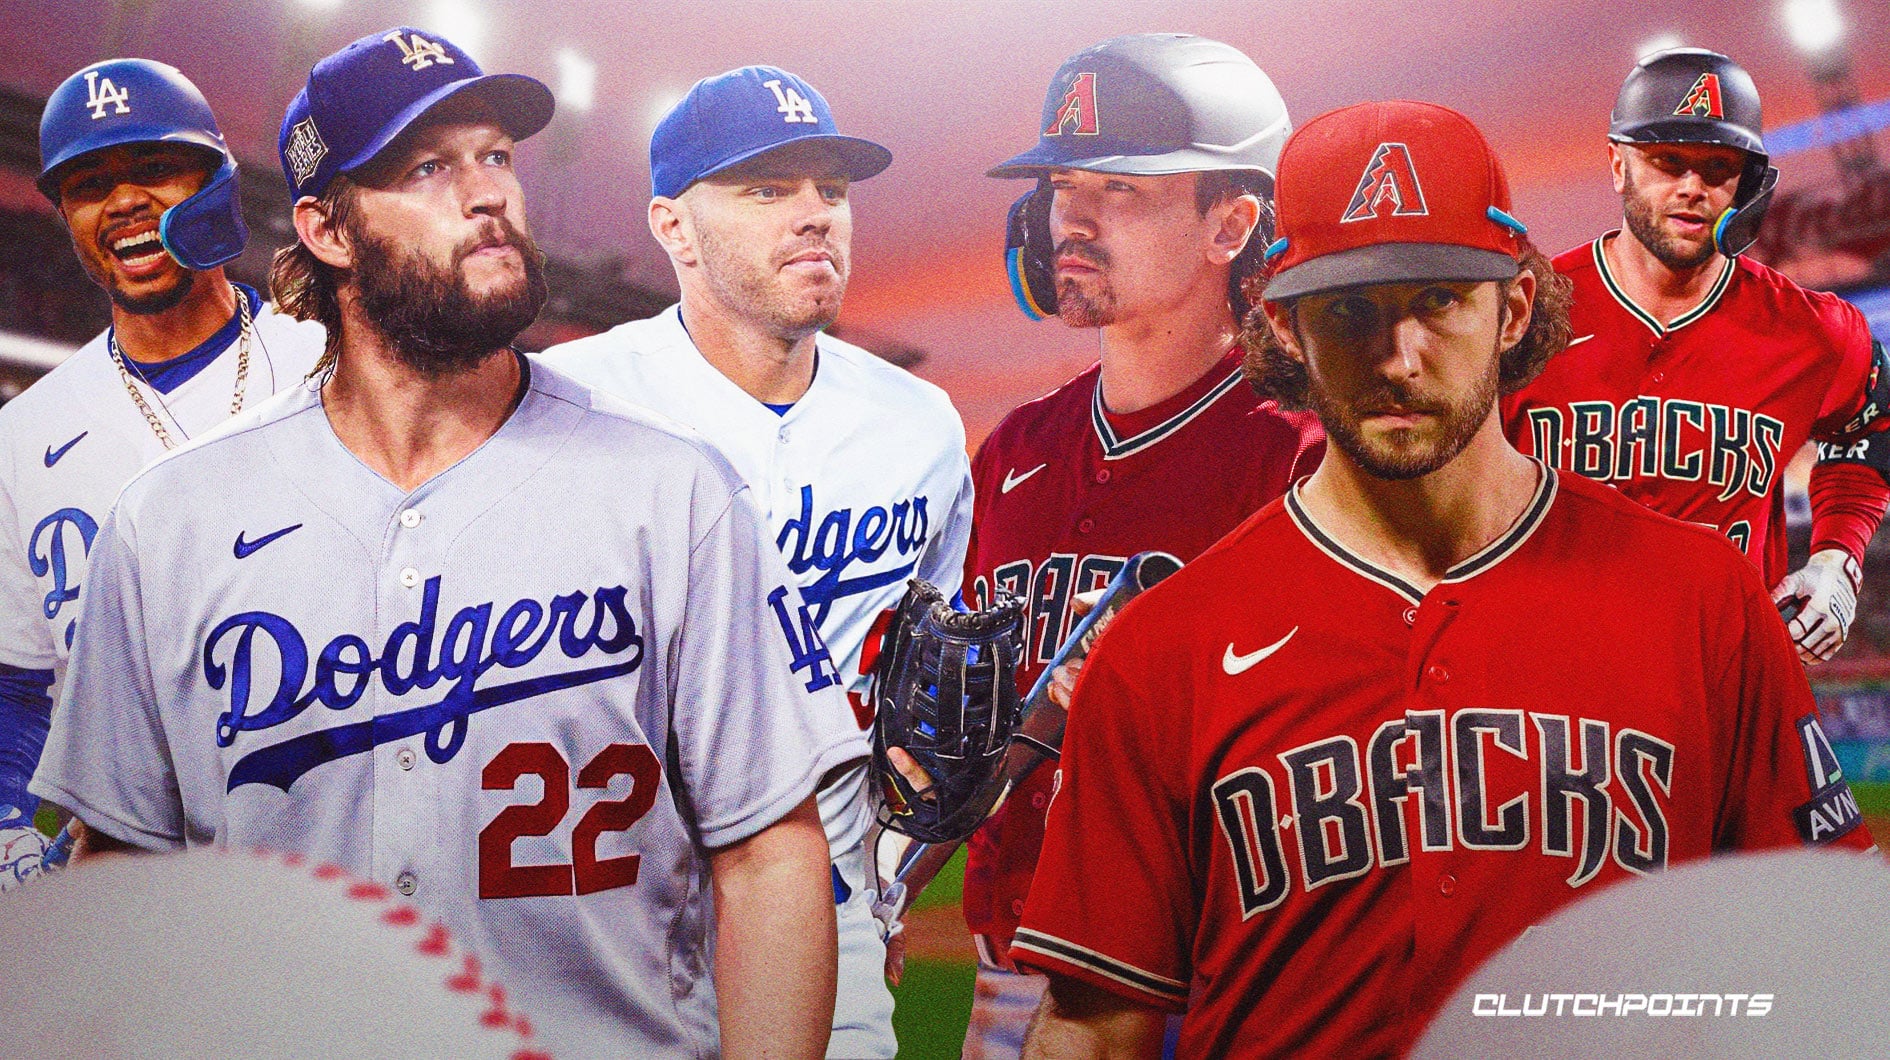 Dodgers vs Braves: Time, TV, how to watch, live stream NLCS Game 5